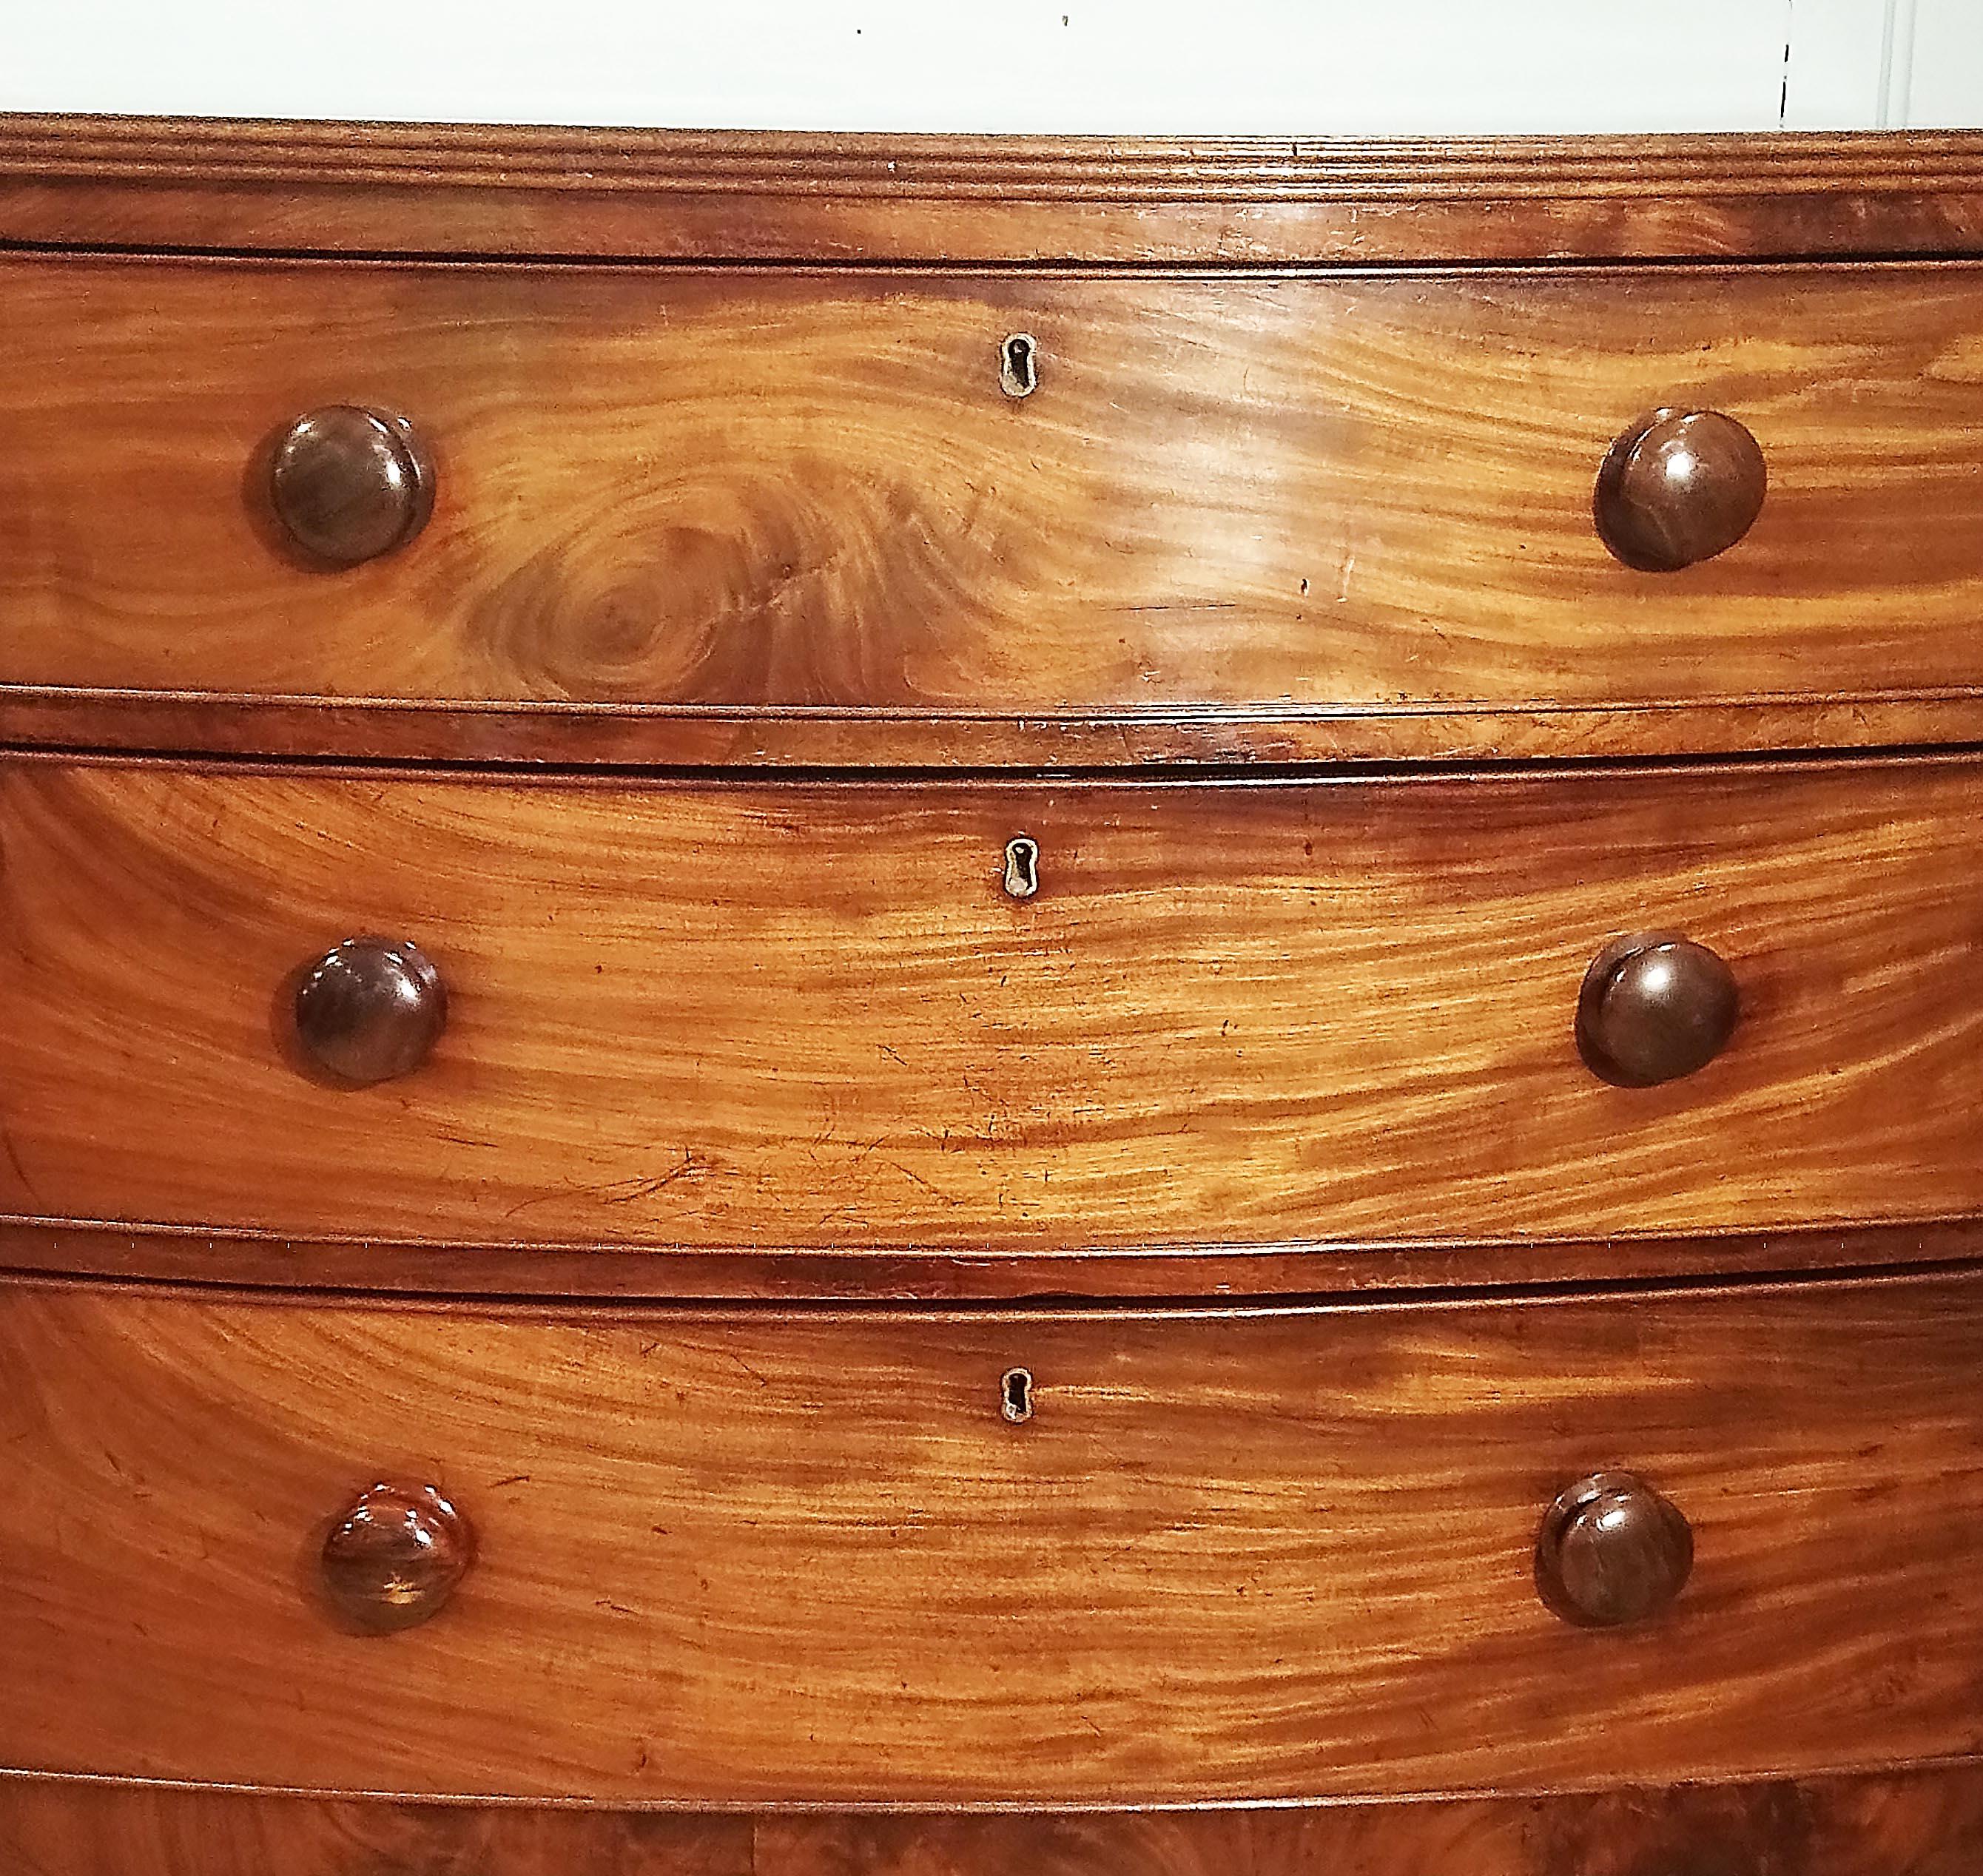 This very attractive English bow fronted chest of drawers features three long graduating drawers with turned wooden knob handles. The chest is an excellent quality piece with an understated elegance and simple design. It measures 35 in – 89 cm wide,